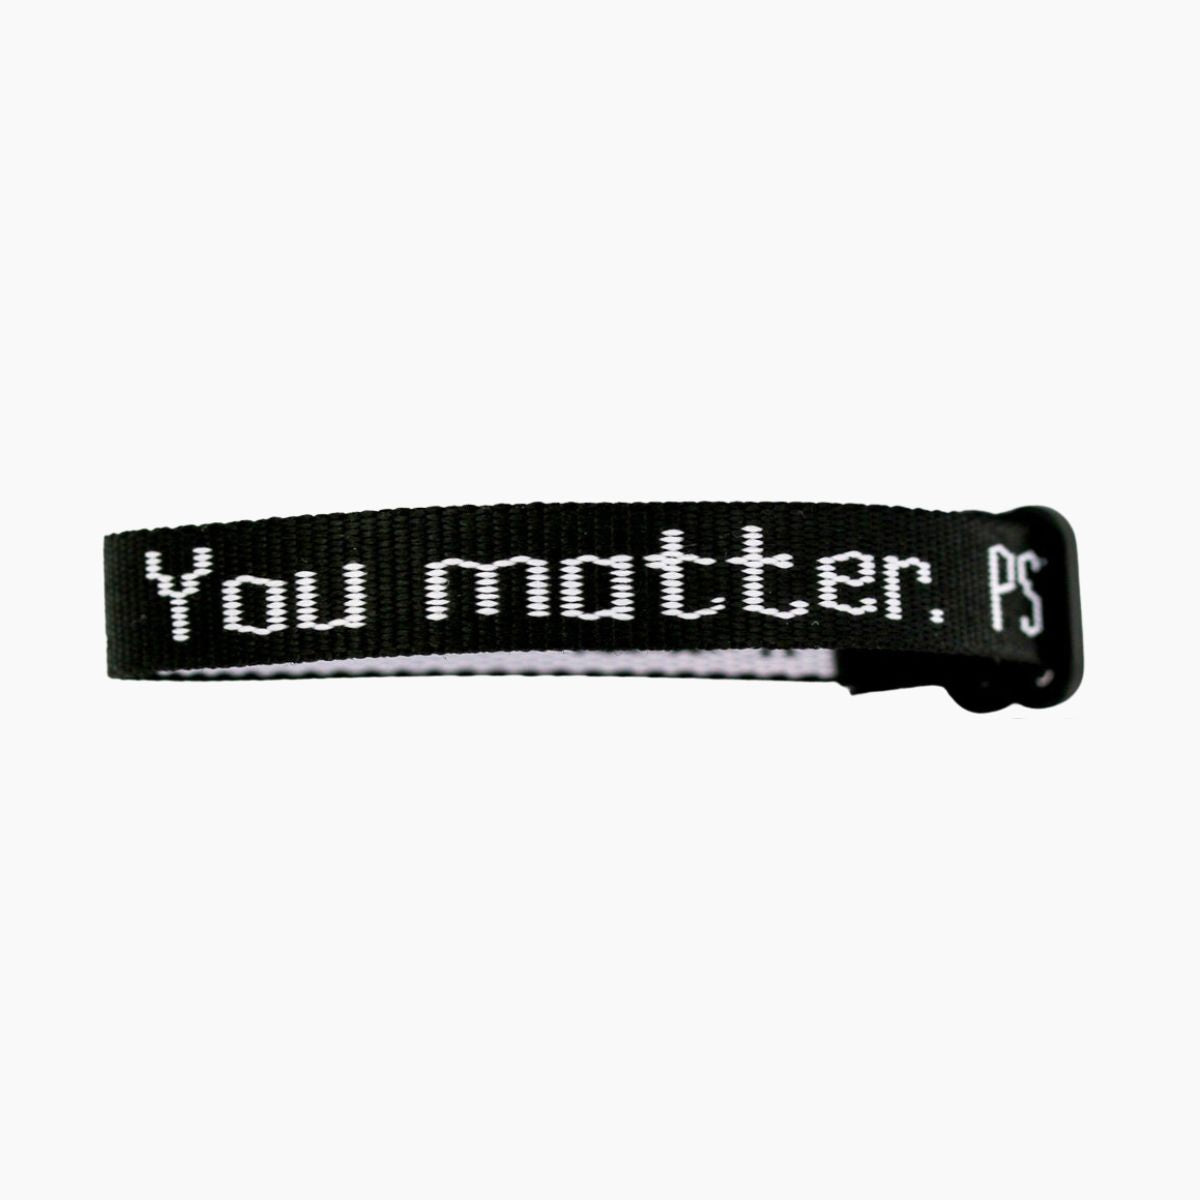 YOU MATTER TwoPack Buddy Check Bracelet  Boot Campaign